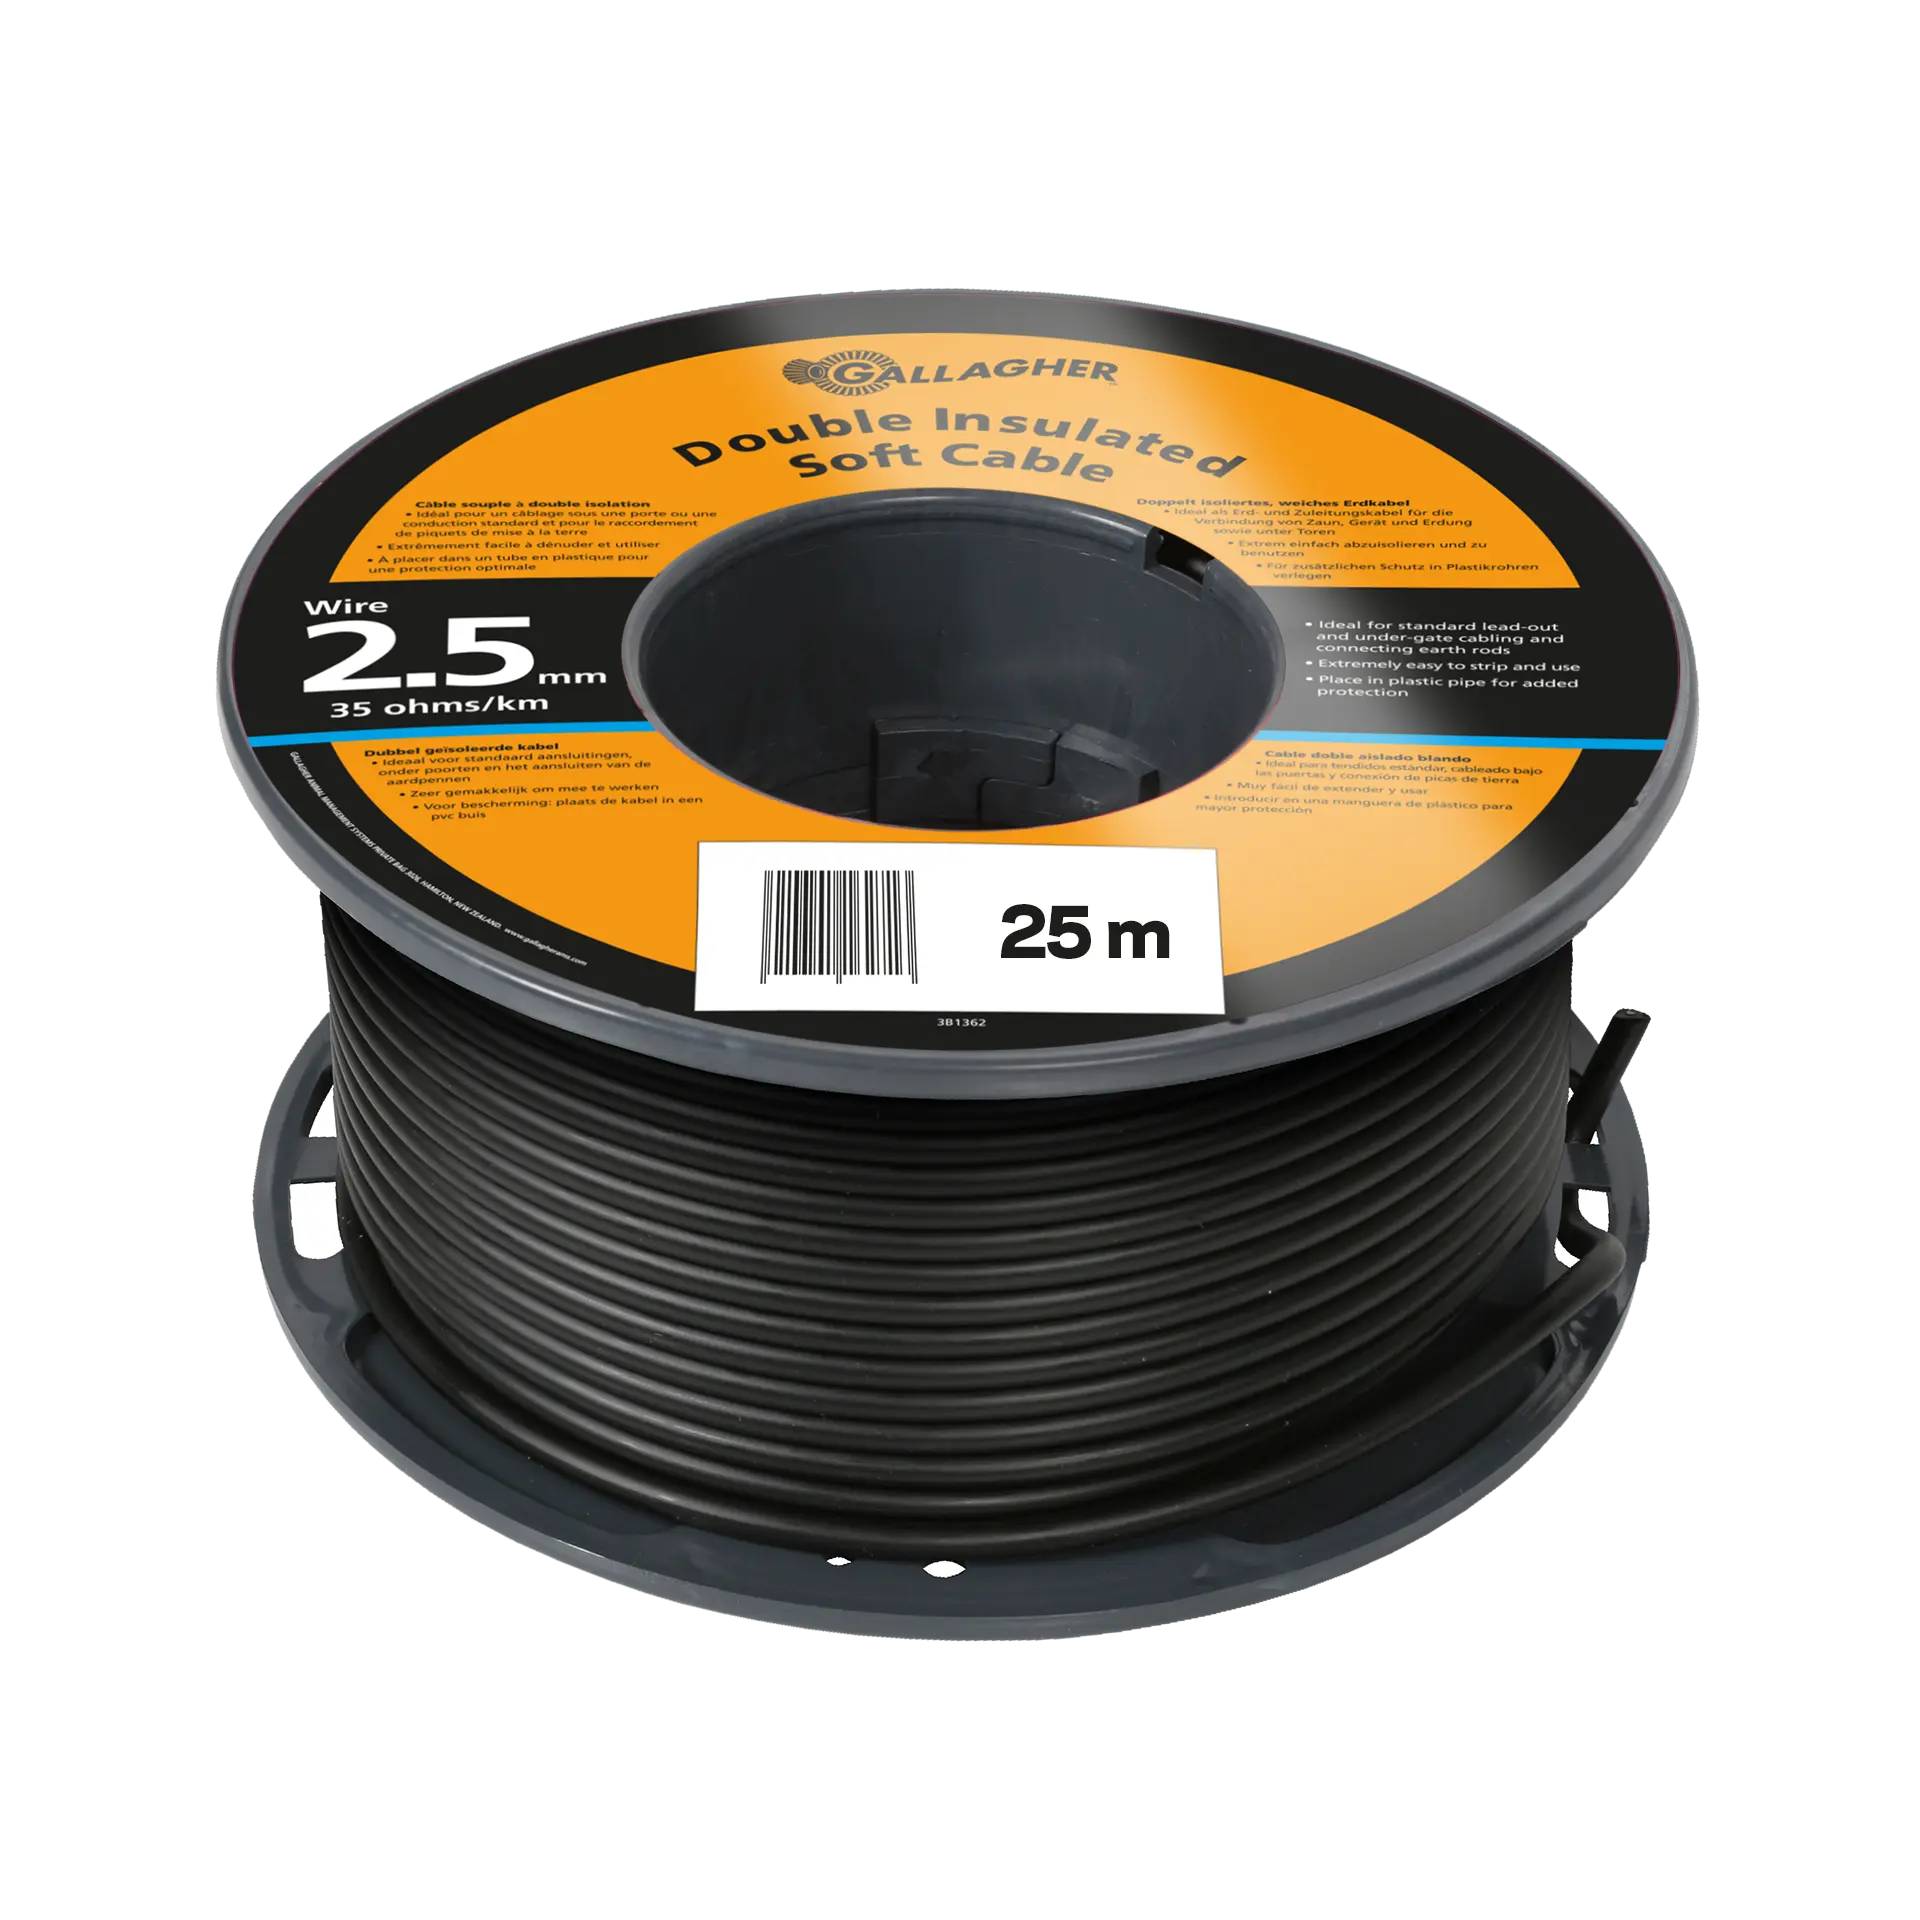 Ground cable ø2.5mm (25 metres) - 35 Ohm/1km